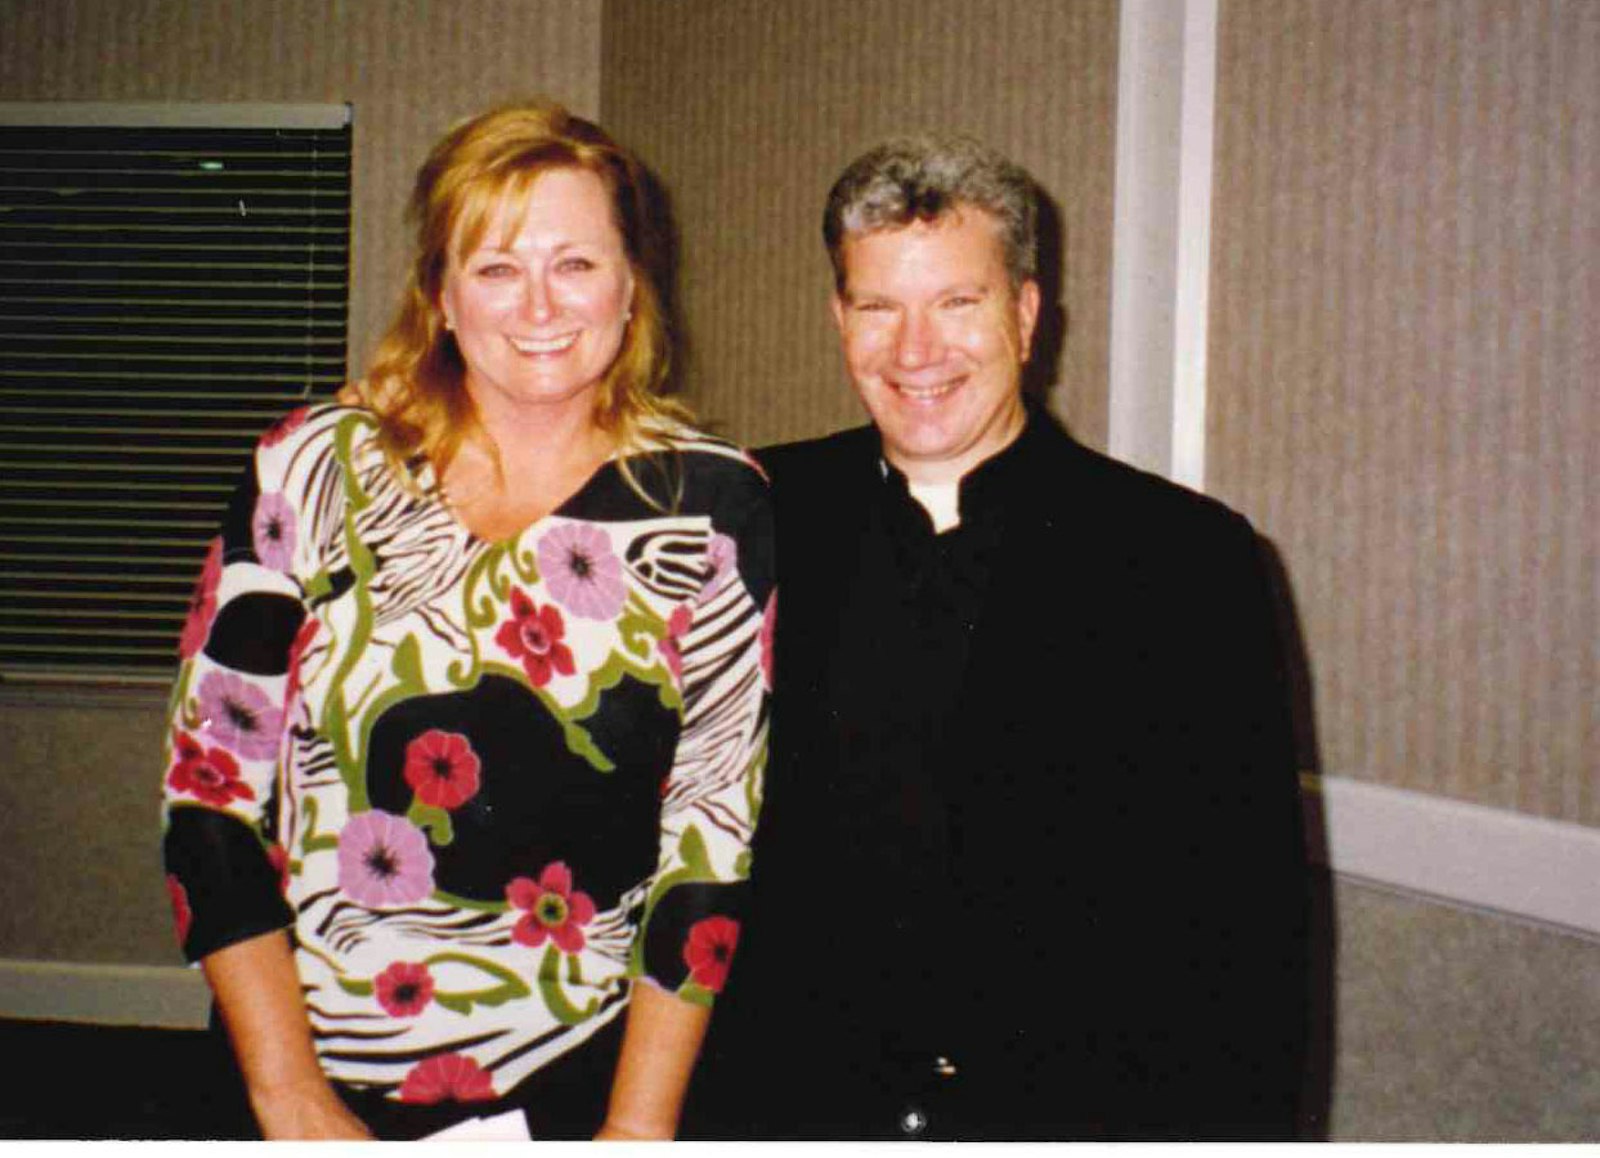 Linda Maccarone, left, former office manager at St. Therese of Lisieux Parish in Shelby Township, smiles with then-Msgr. Jeffrey Monforton, who served as pastor of the parish from 2005-06. (Courtesy of Linda Maccarone)